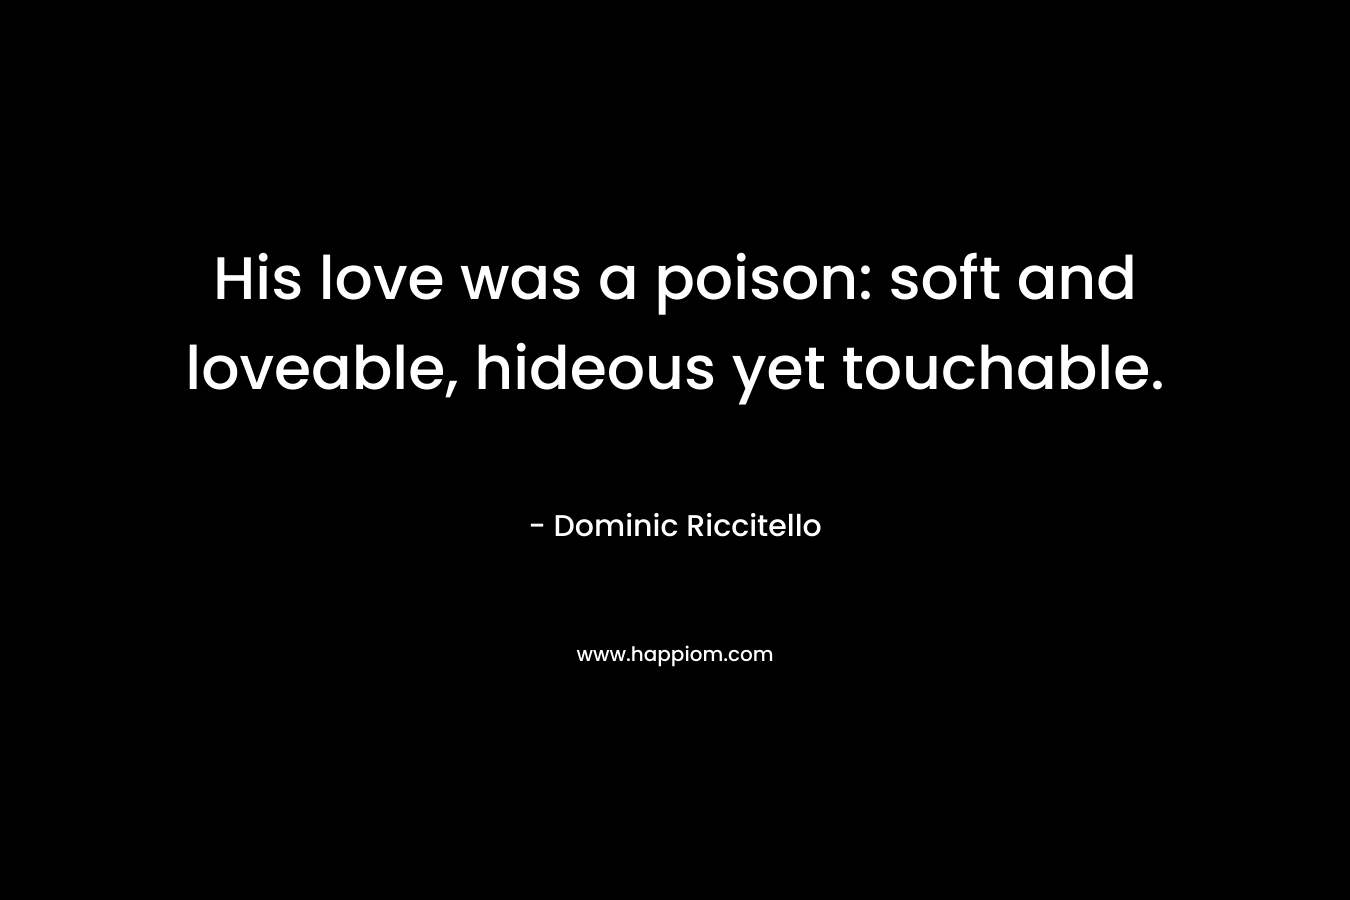 His love was a poison: soft and loveable, hideous yet touchable.